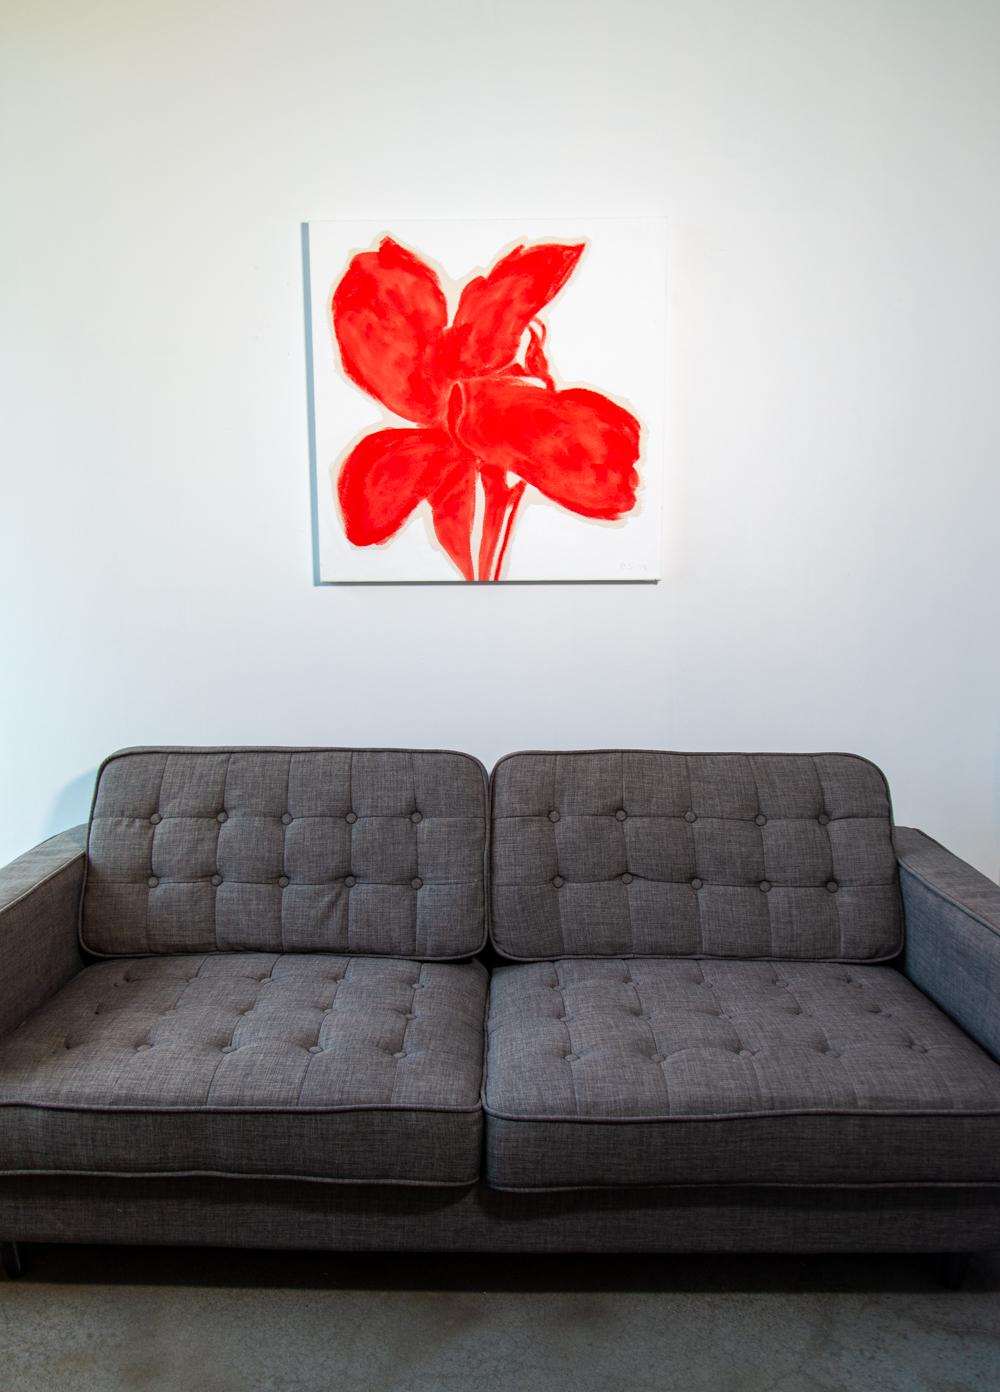 The distinctive shape of a bright red lily pops from the canvas in this engaging floral abstract by Vancouver artist, Pat Service. Reminiscent of Andy Warhol, Service’s flowers are pared down to the essentials--simple shapes without leaves or stems.